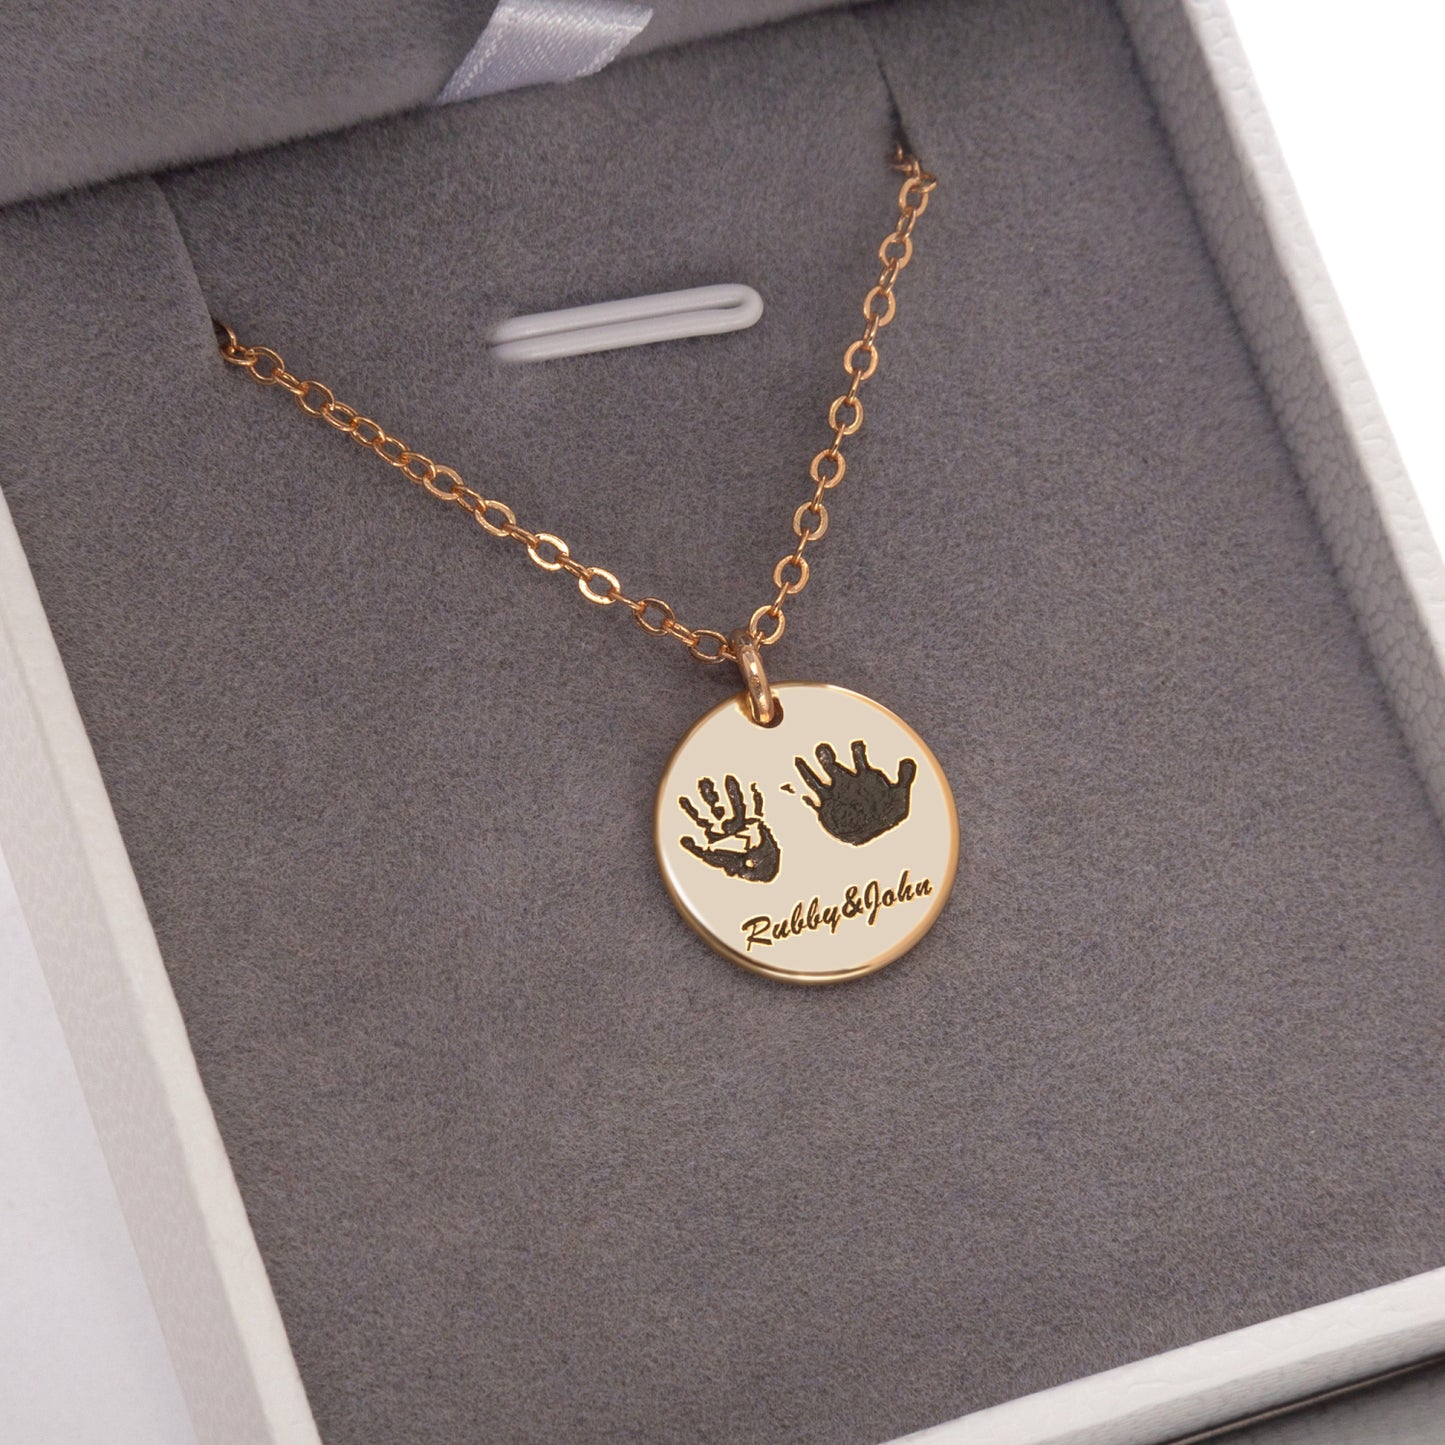 Personalized Handprint Necklace with Name